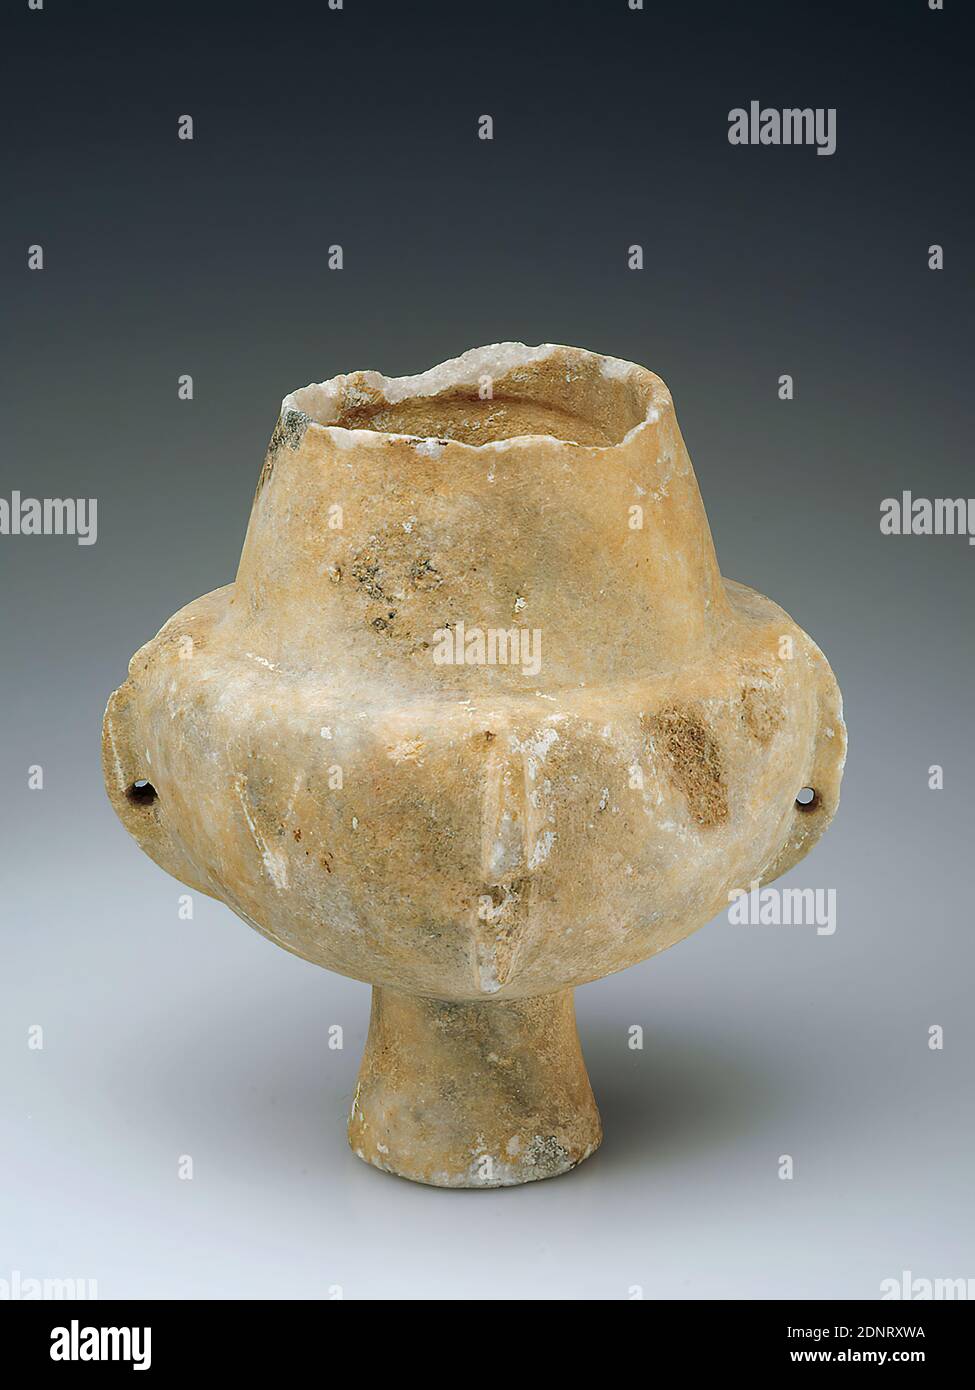 Cone neck vessel, marble, chiseled, smoothed, polished, marble, total: height: 17.8 cm; diameter: 14.5 cm, votive offerings, burial objects, ritual objects and accessories, Aegean Bronze Age, Early Cycladic, FK I, The cone neck vessel from Paros is made of large crystalline, pure white island marble. The surface is patinated yellowish-grey. The hemispherical body with four vertical, pierced ribs rests on a high conical base that is slightly inwardly indented. They once served to pull a hanging cord through. The neck tapers conically; the muzzle-edge is set off plastically Stock Photo